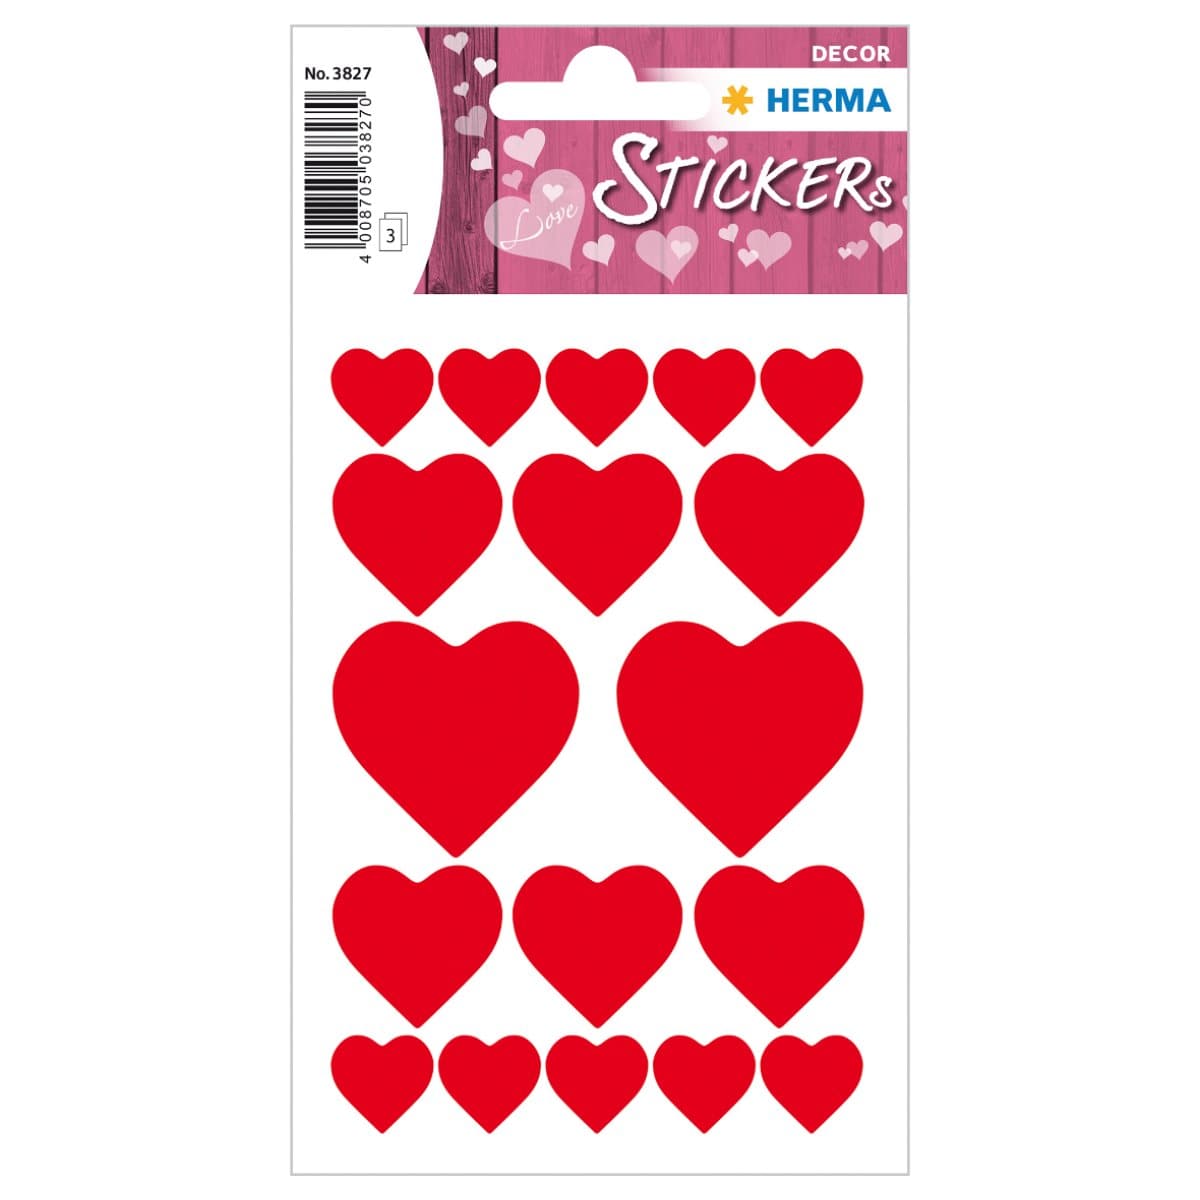 Herma Decor Stickers HEARTS, 3 sheets/pack, Red